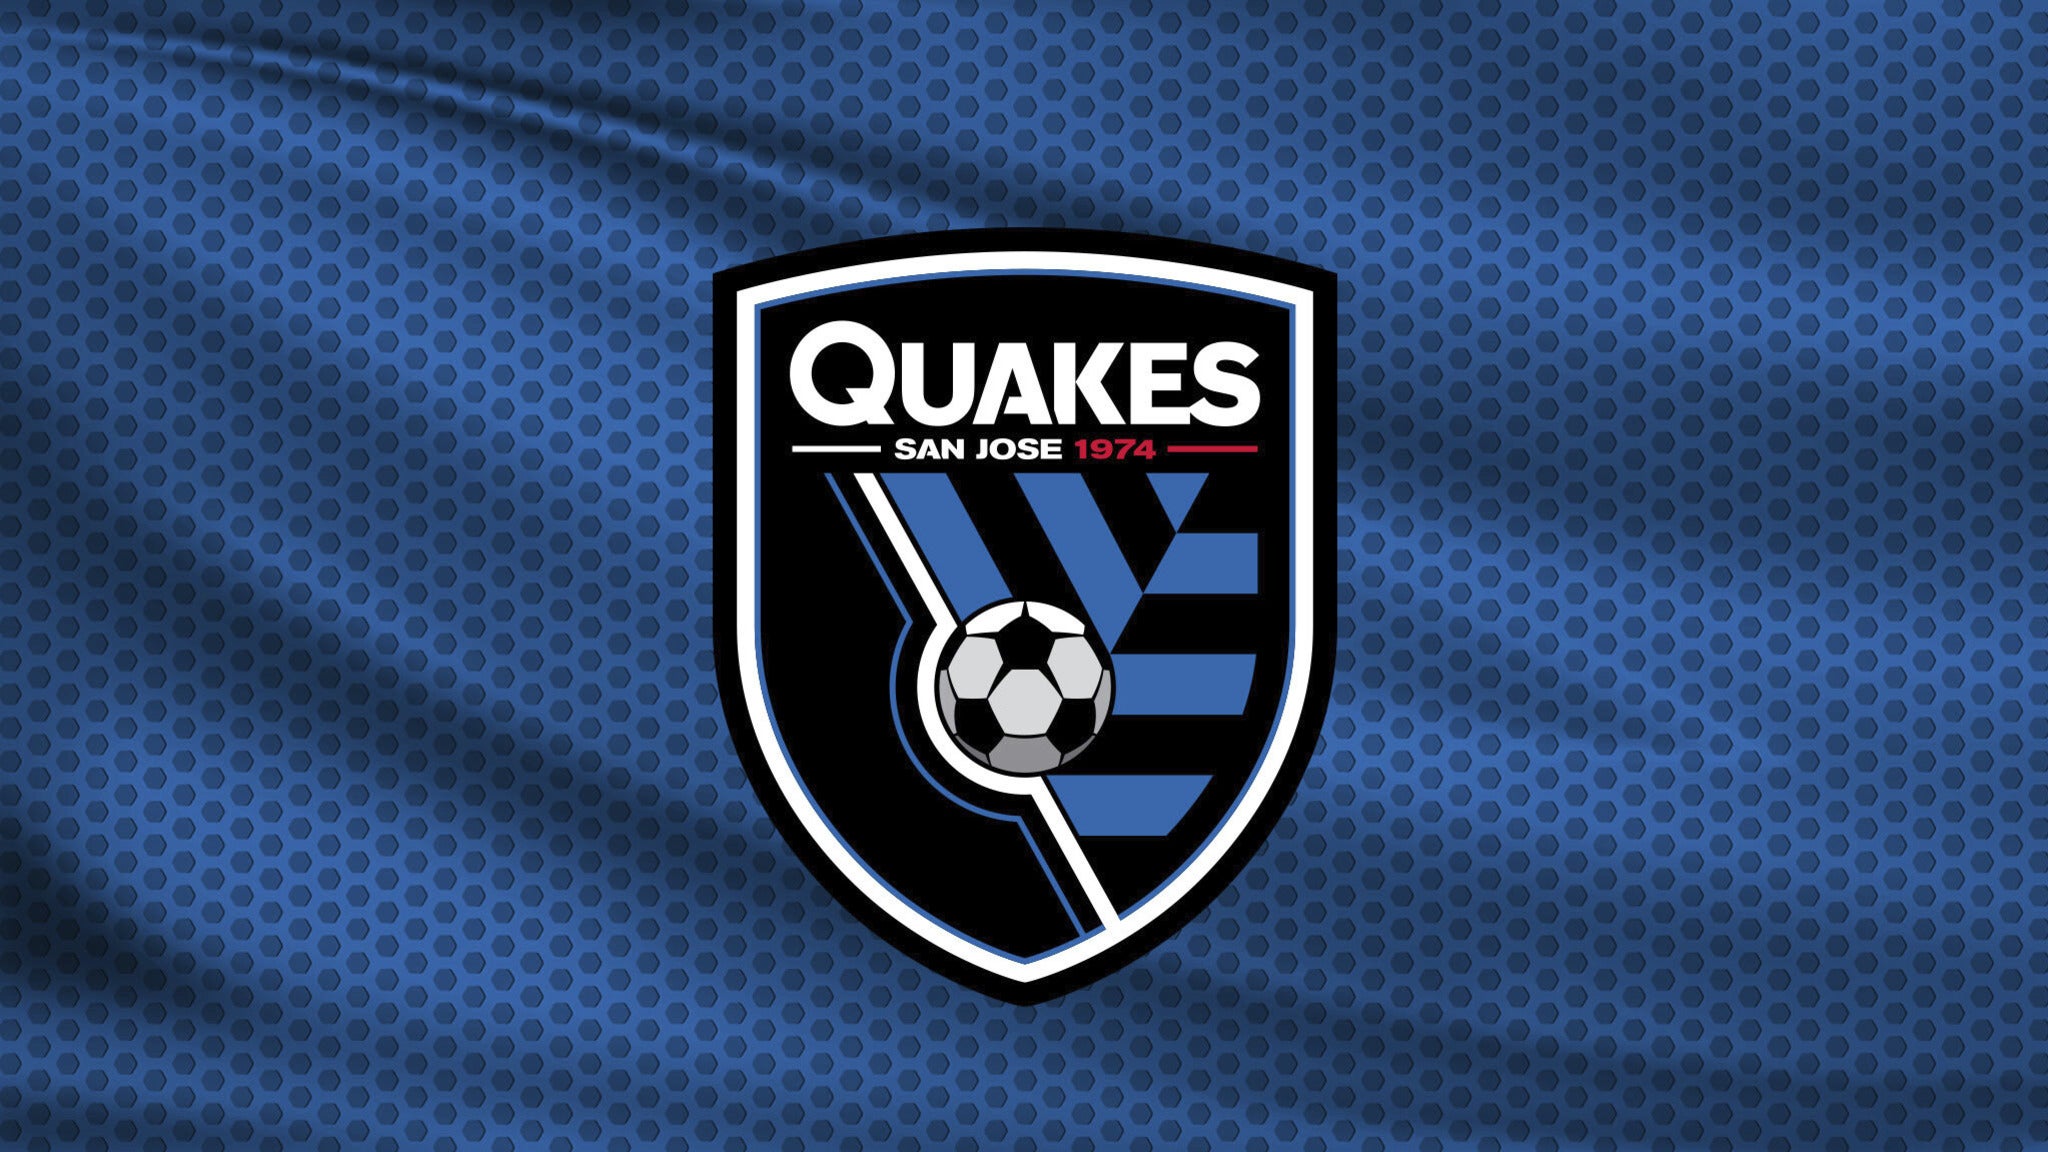 San Jose Earthquakes vs. Chicago Fire FC at PayPal Park